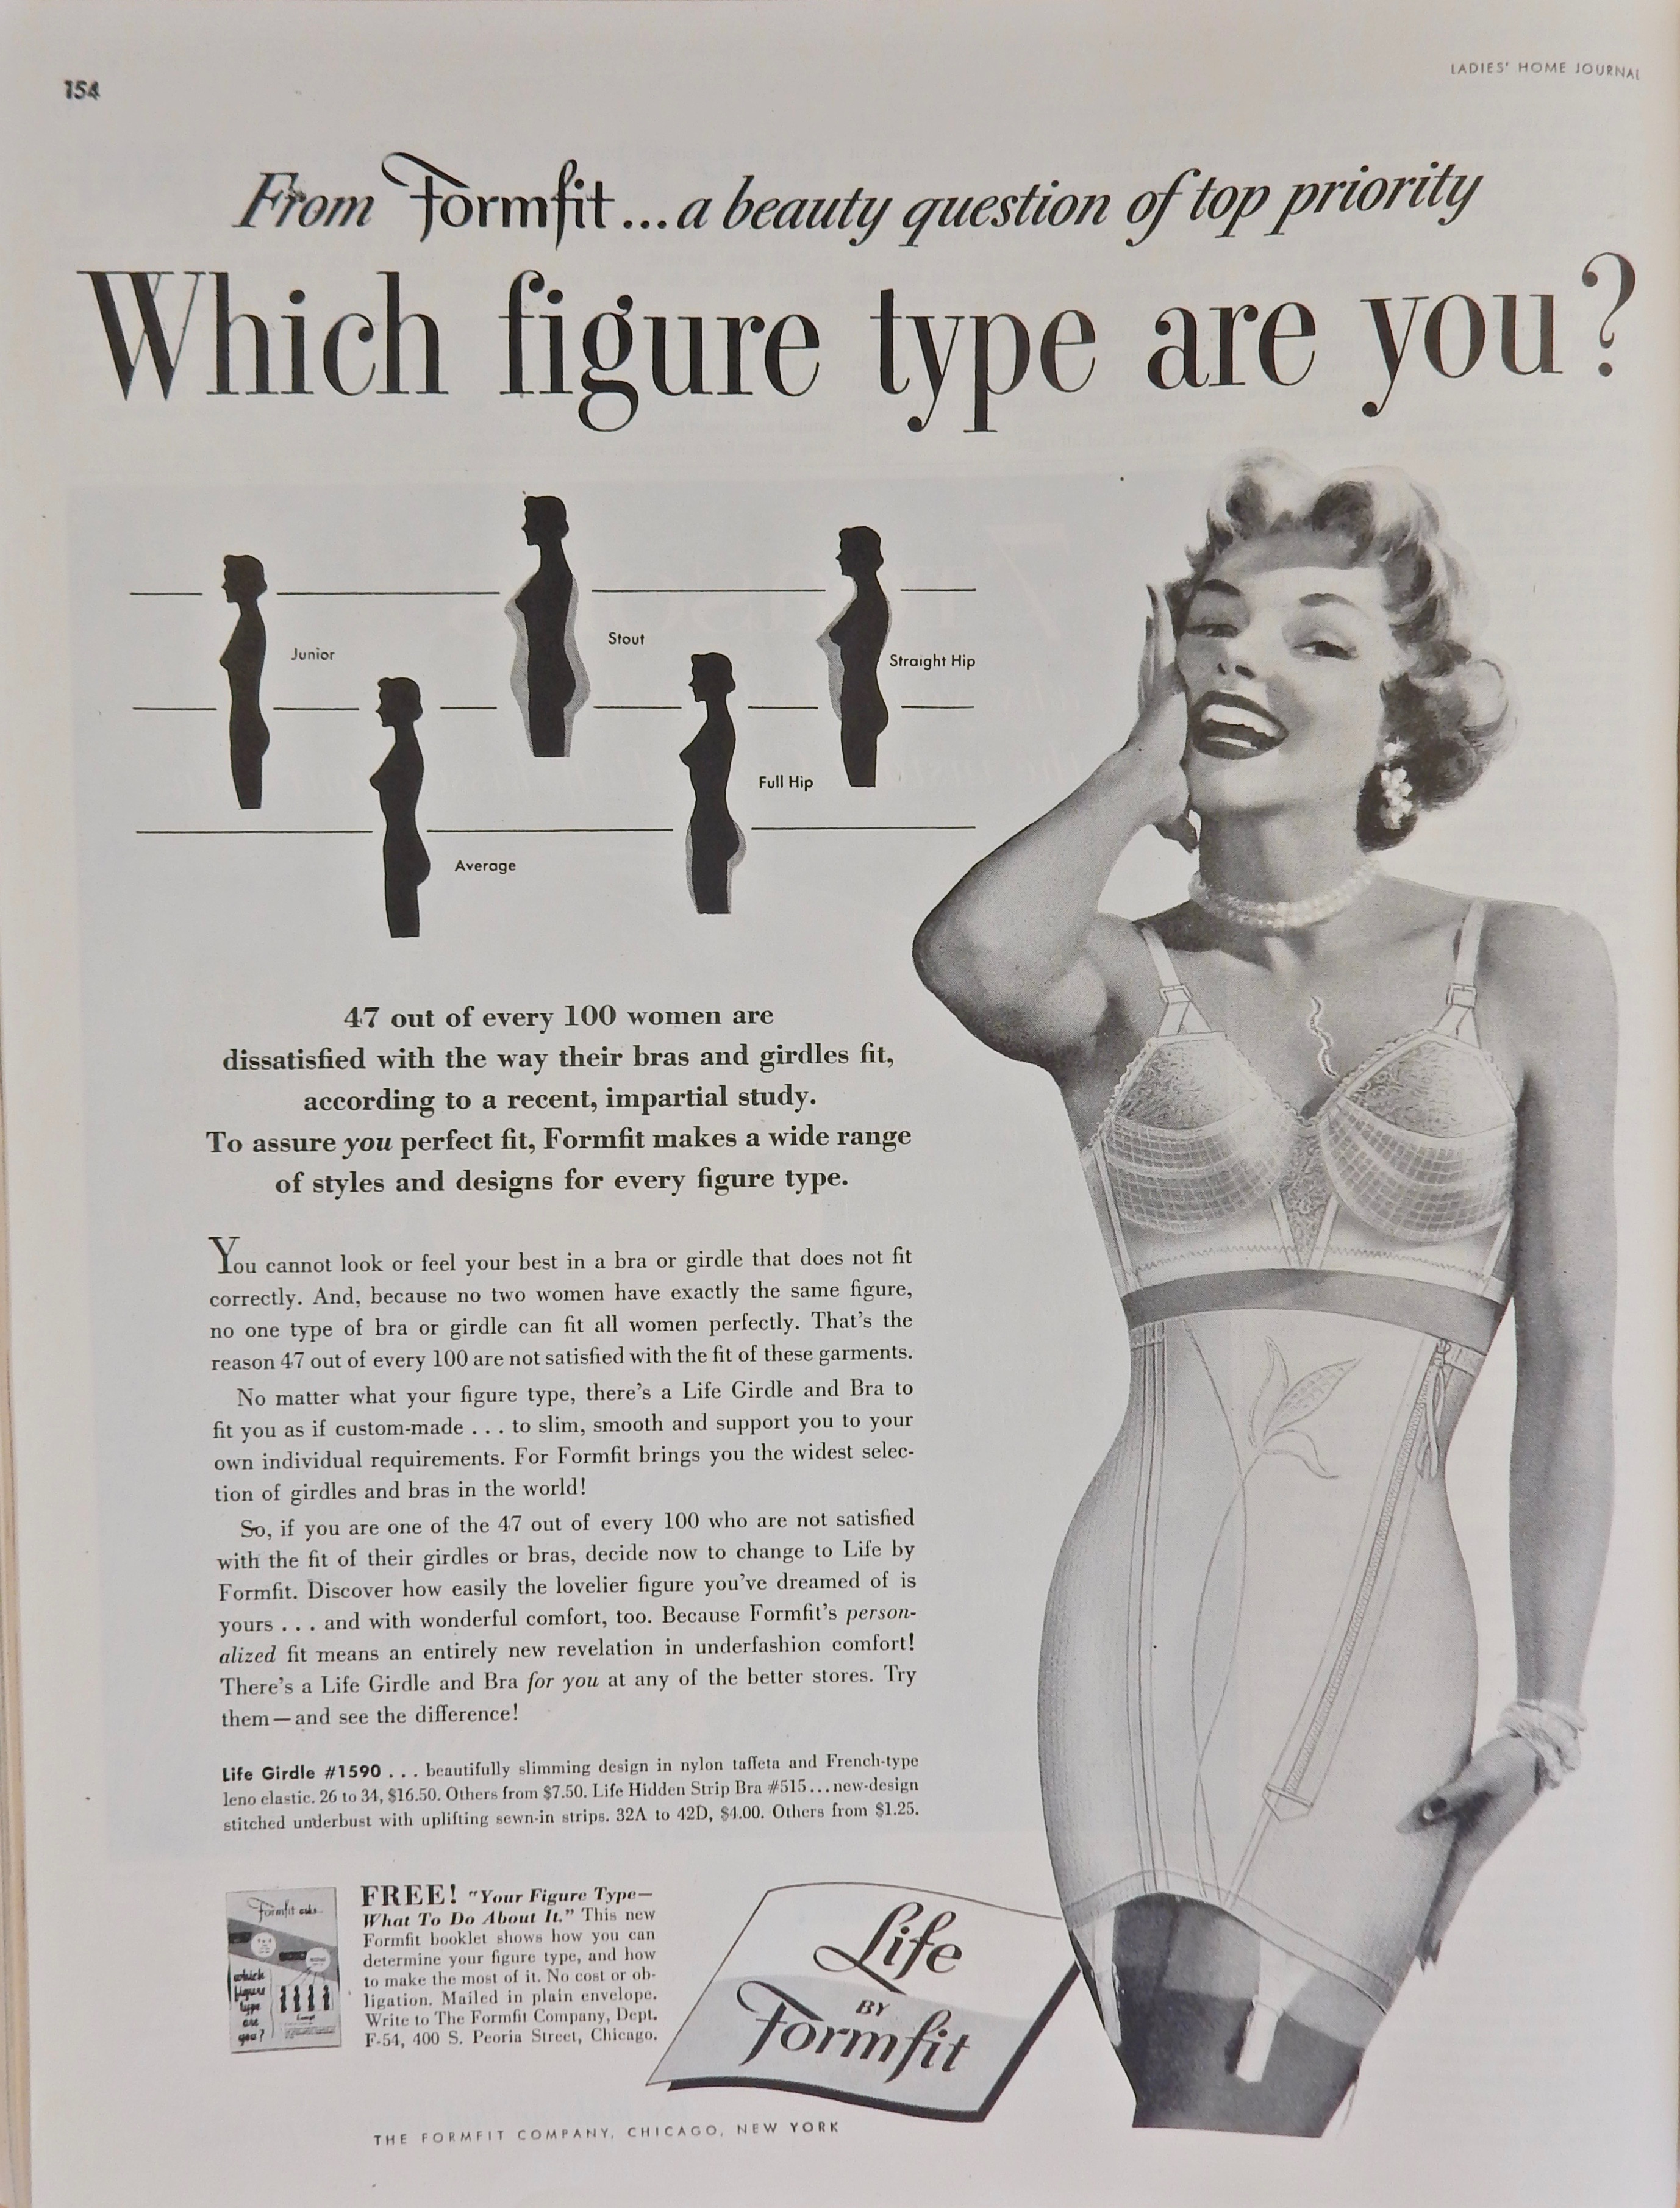 A beauty question of top priority” – Formfit bras and girdles, Ladies Home  Journal, October 1954, 154. · Magazines